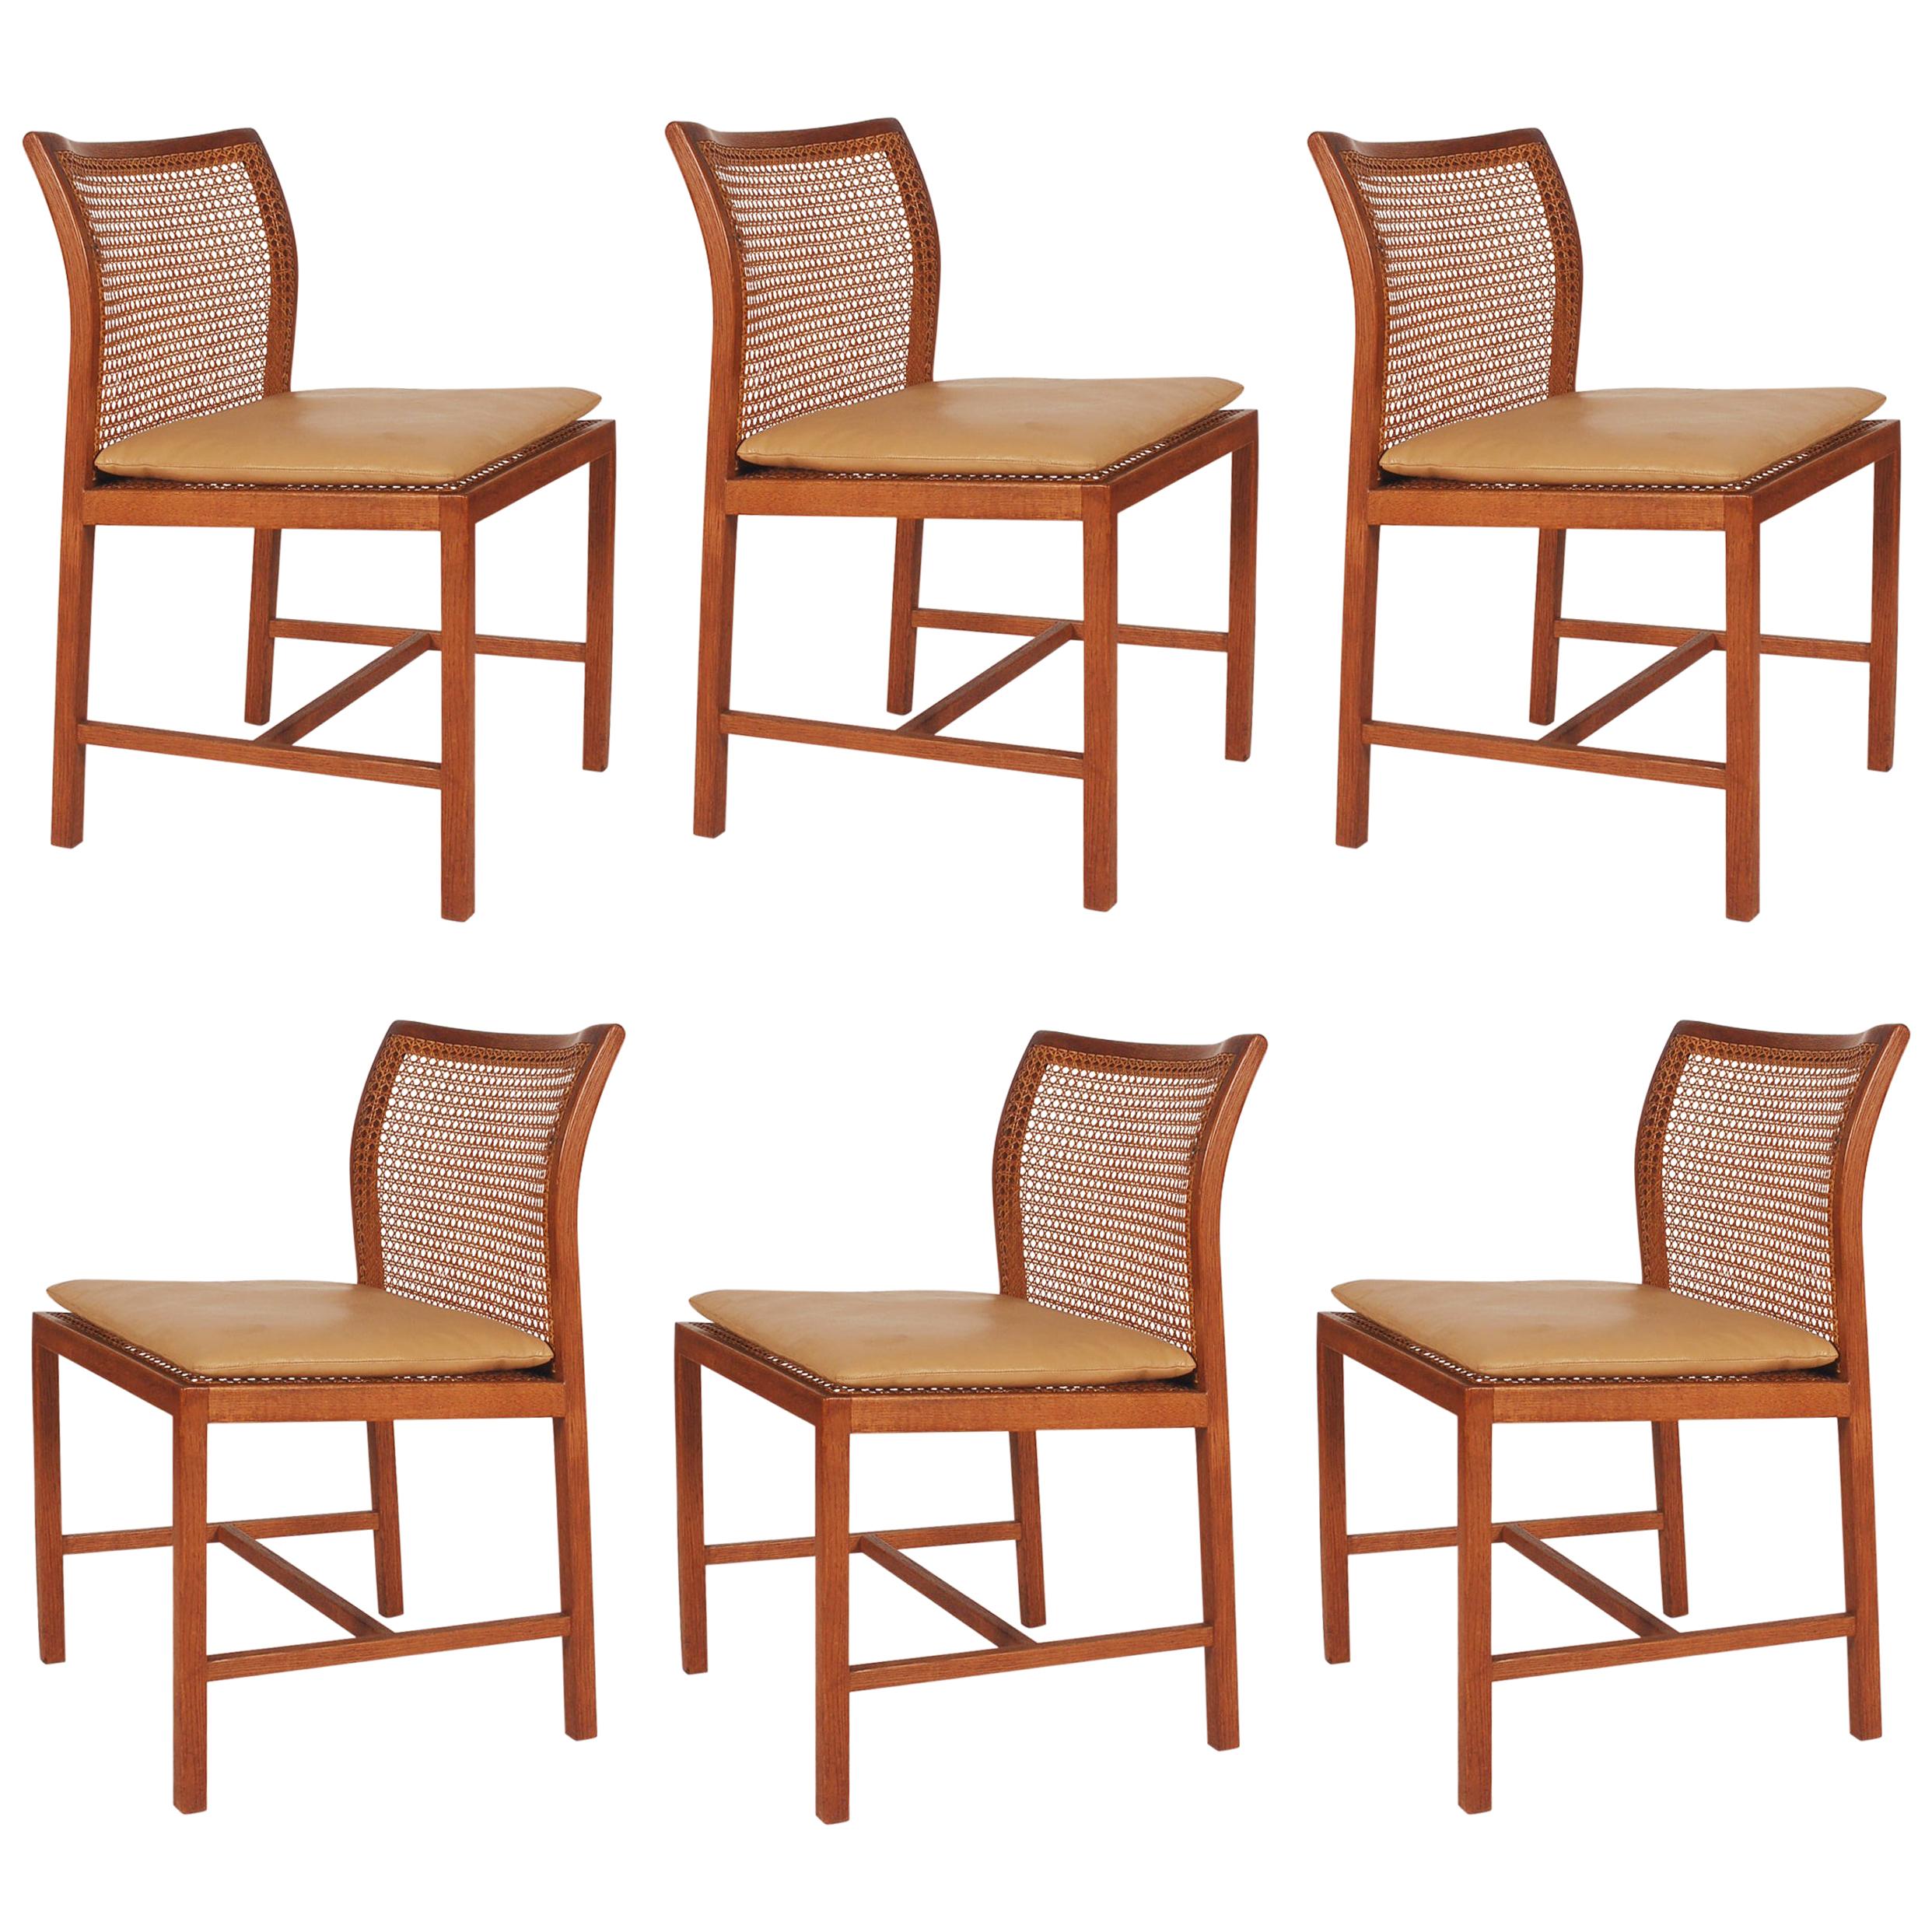 Set of Six Midcentury Danish Modern Cane Dining Chairs by Ditte & Adrian Heath